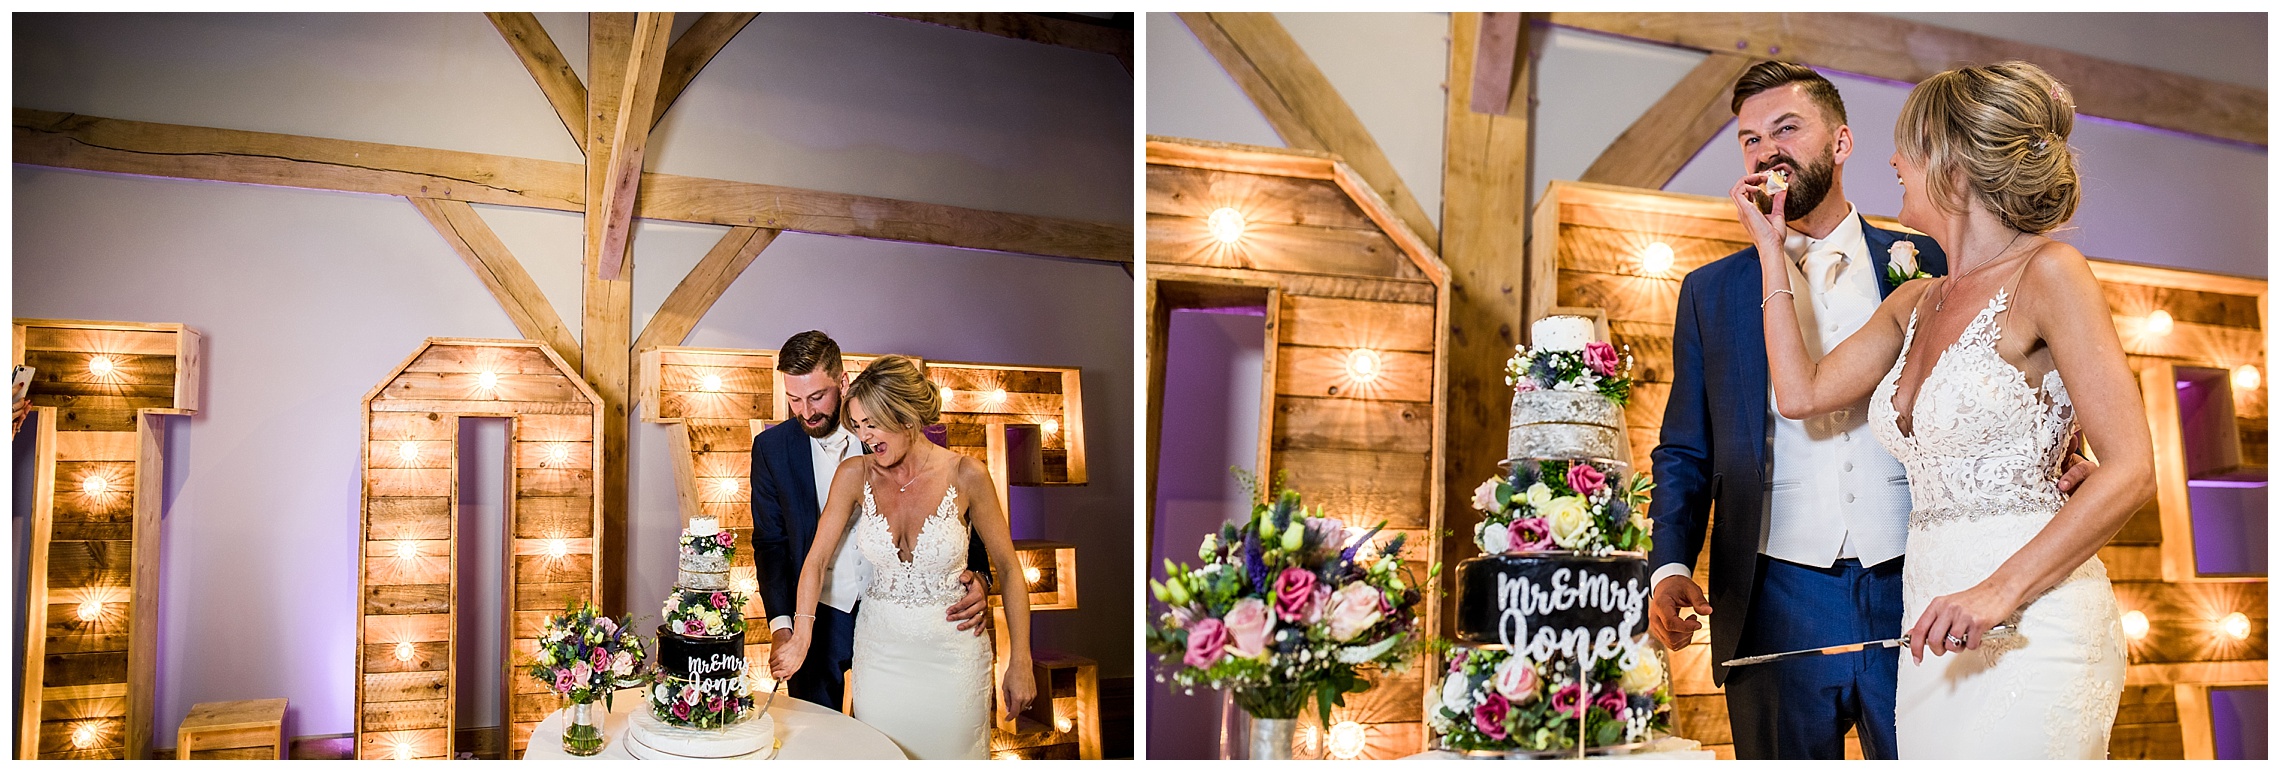 cutting cake in front of illuminated love letters at redhouse barn